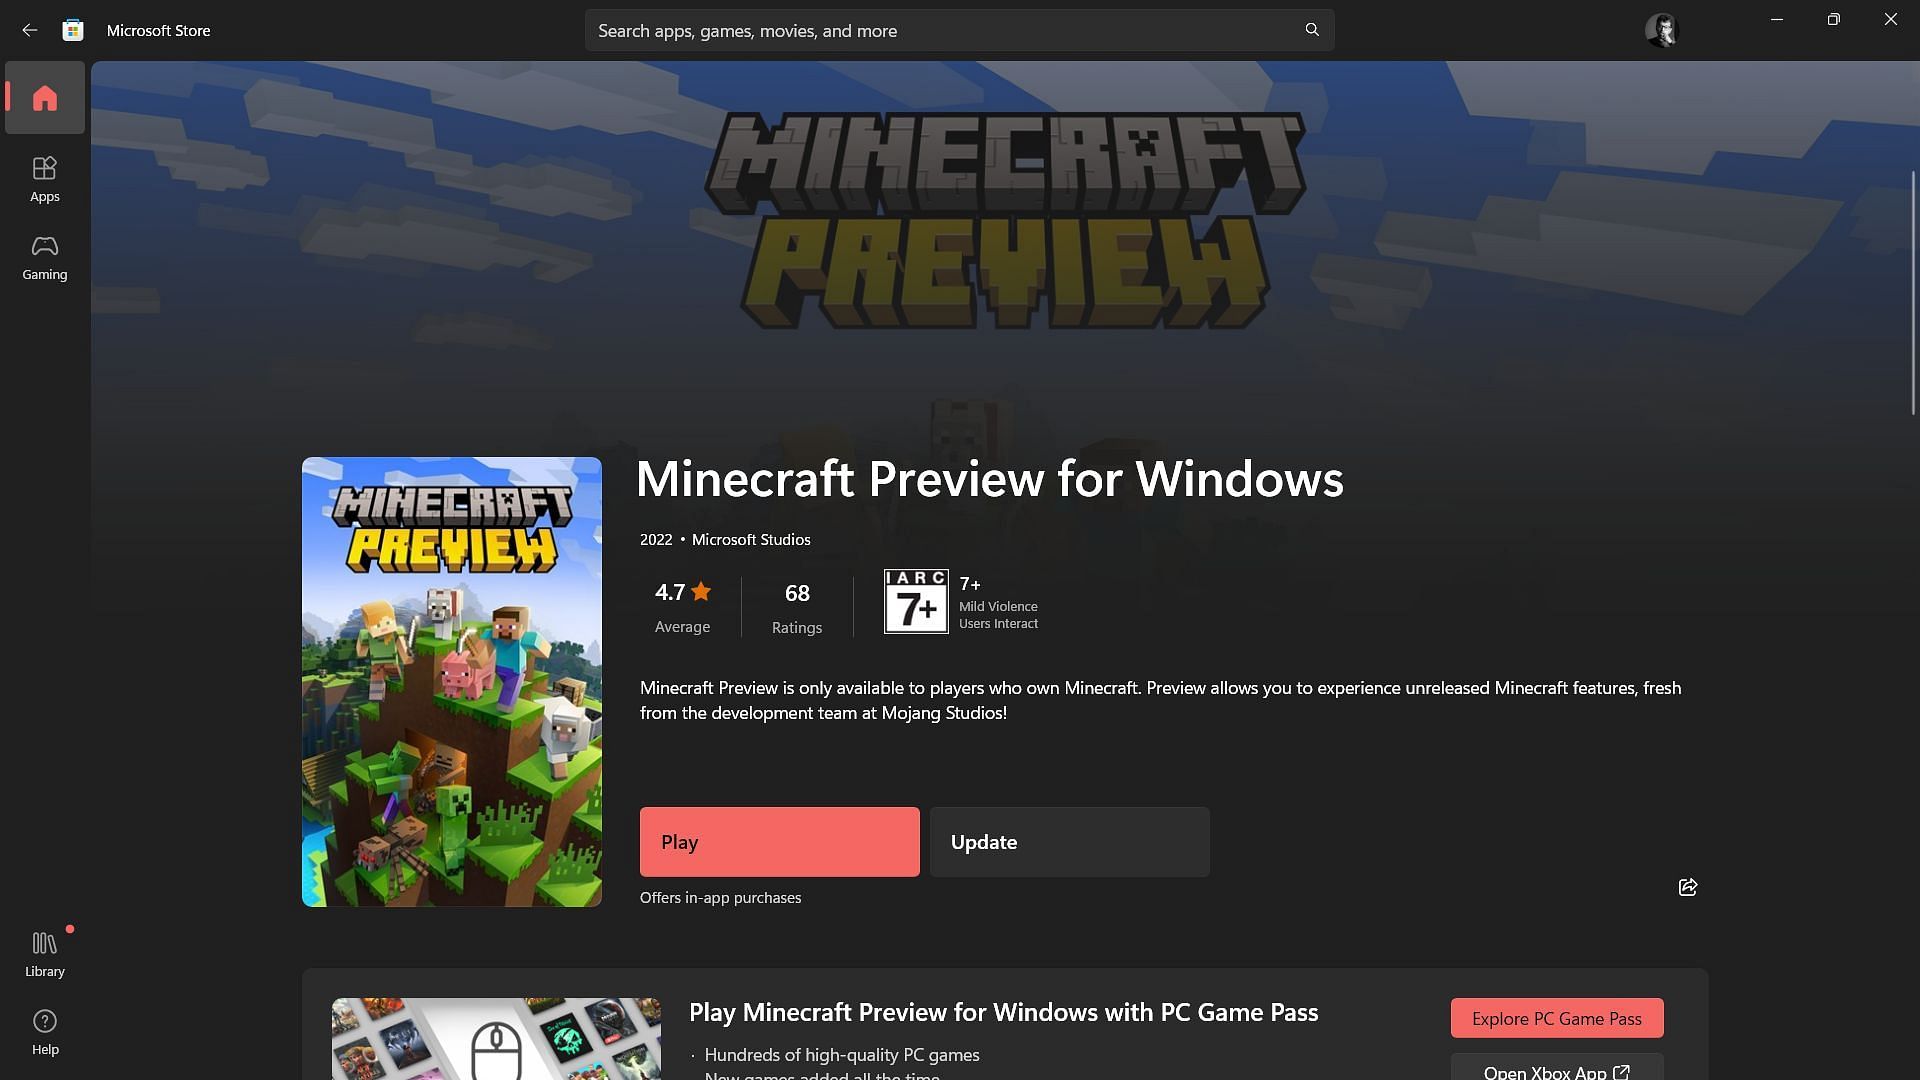 Minecraft Bedrock beta preview 1.20.0.23 can be installed through the Microsoft Store on Windows (Image via Sportskeeda)